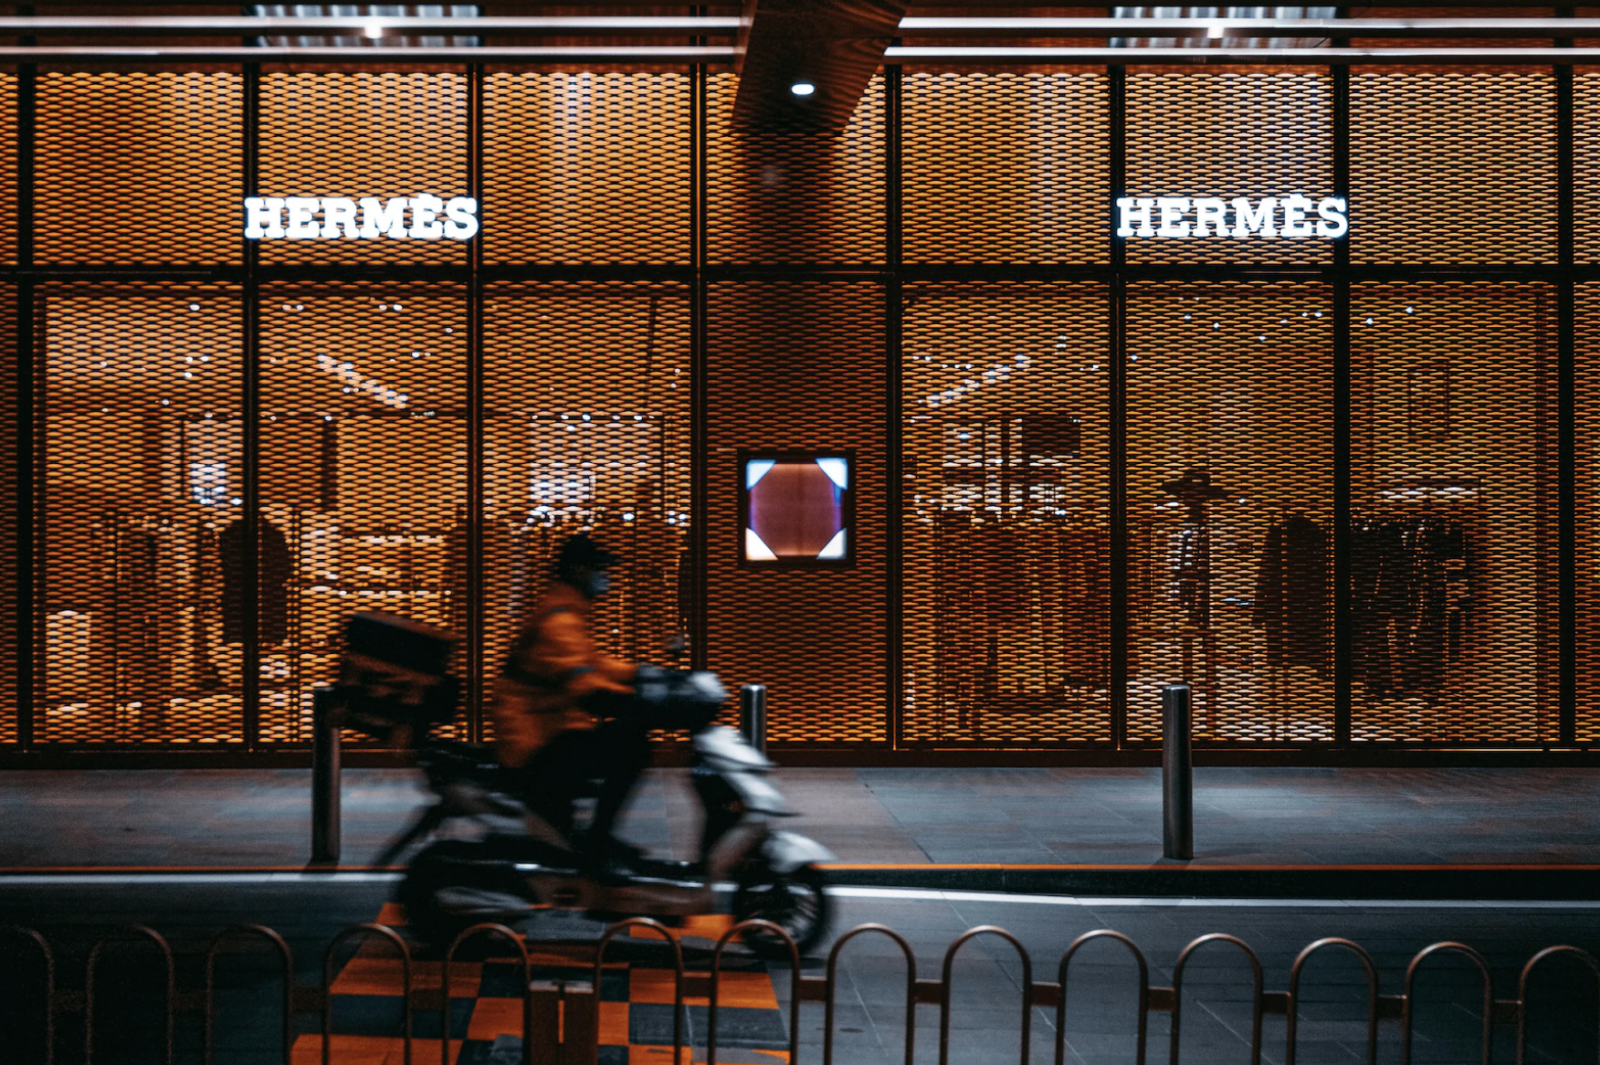 The outside of an Hermès store